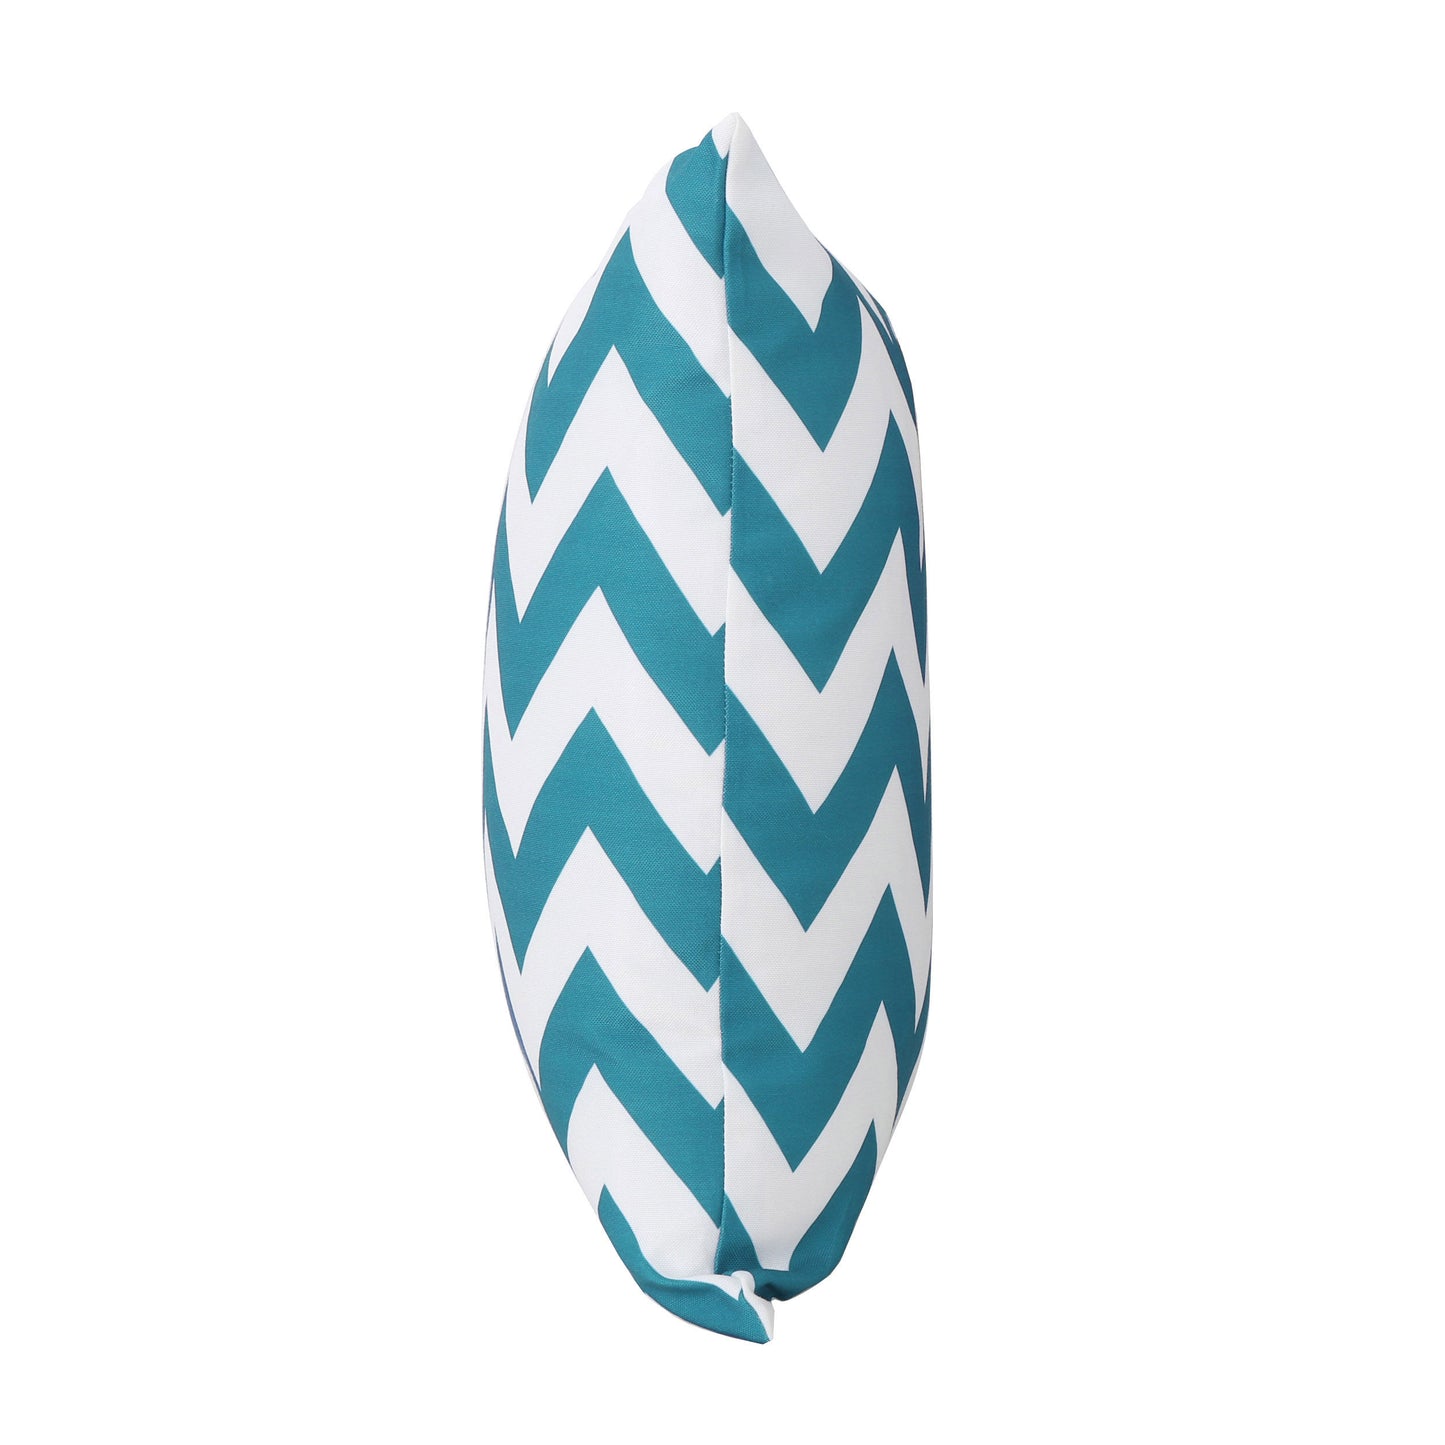 Ernest Indoor Zig Zag Striped Water Resistant Square Throw Pillow